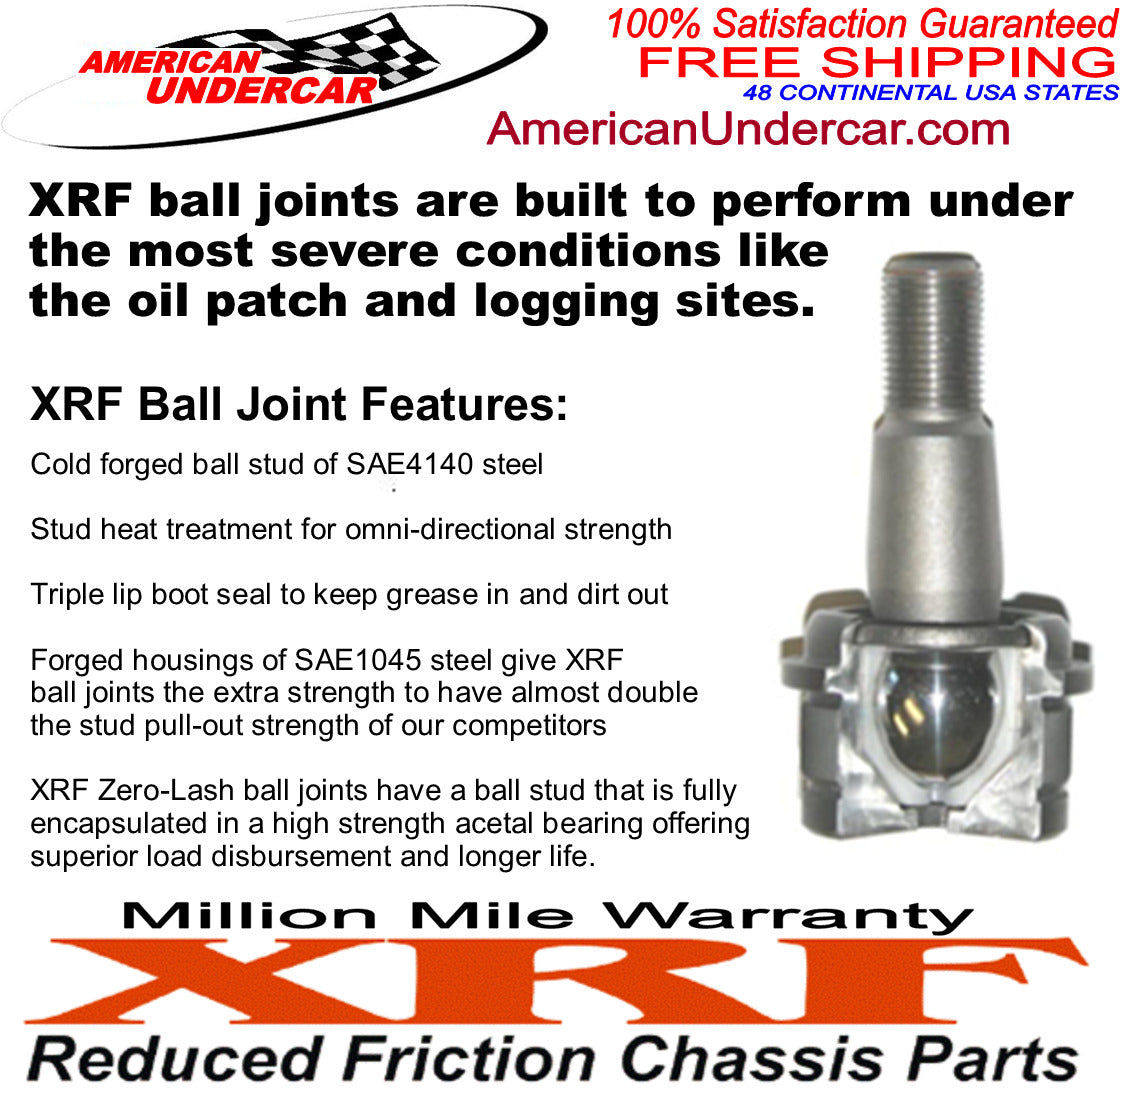 XRF Ford Excursion Ball Joint Upper and Lower Suspension Kit 2000 - 2005 2WD